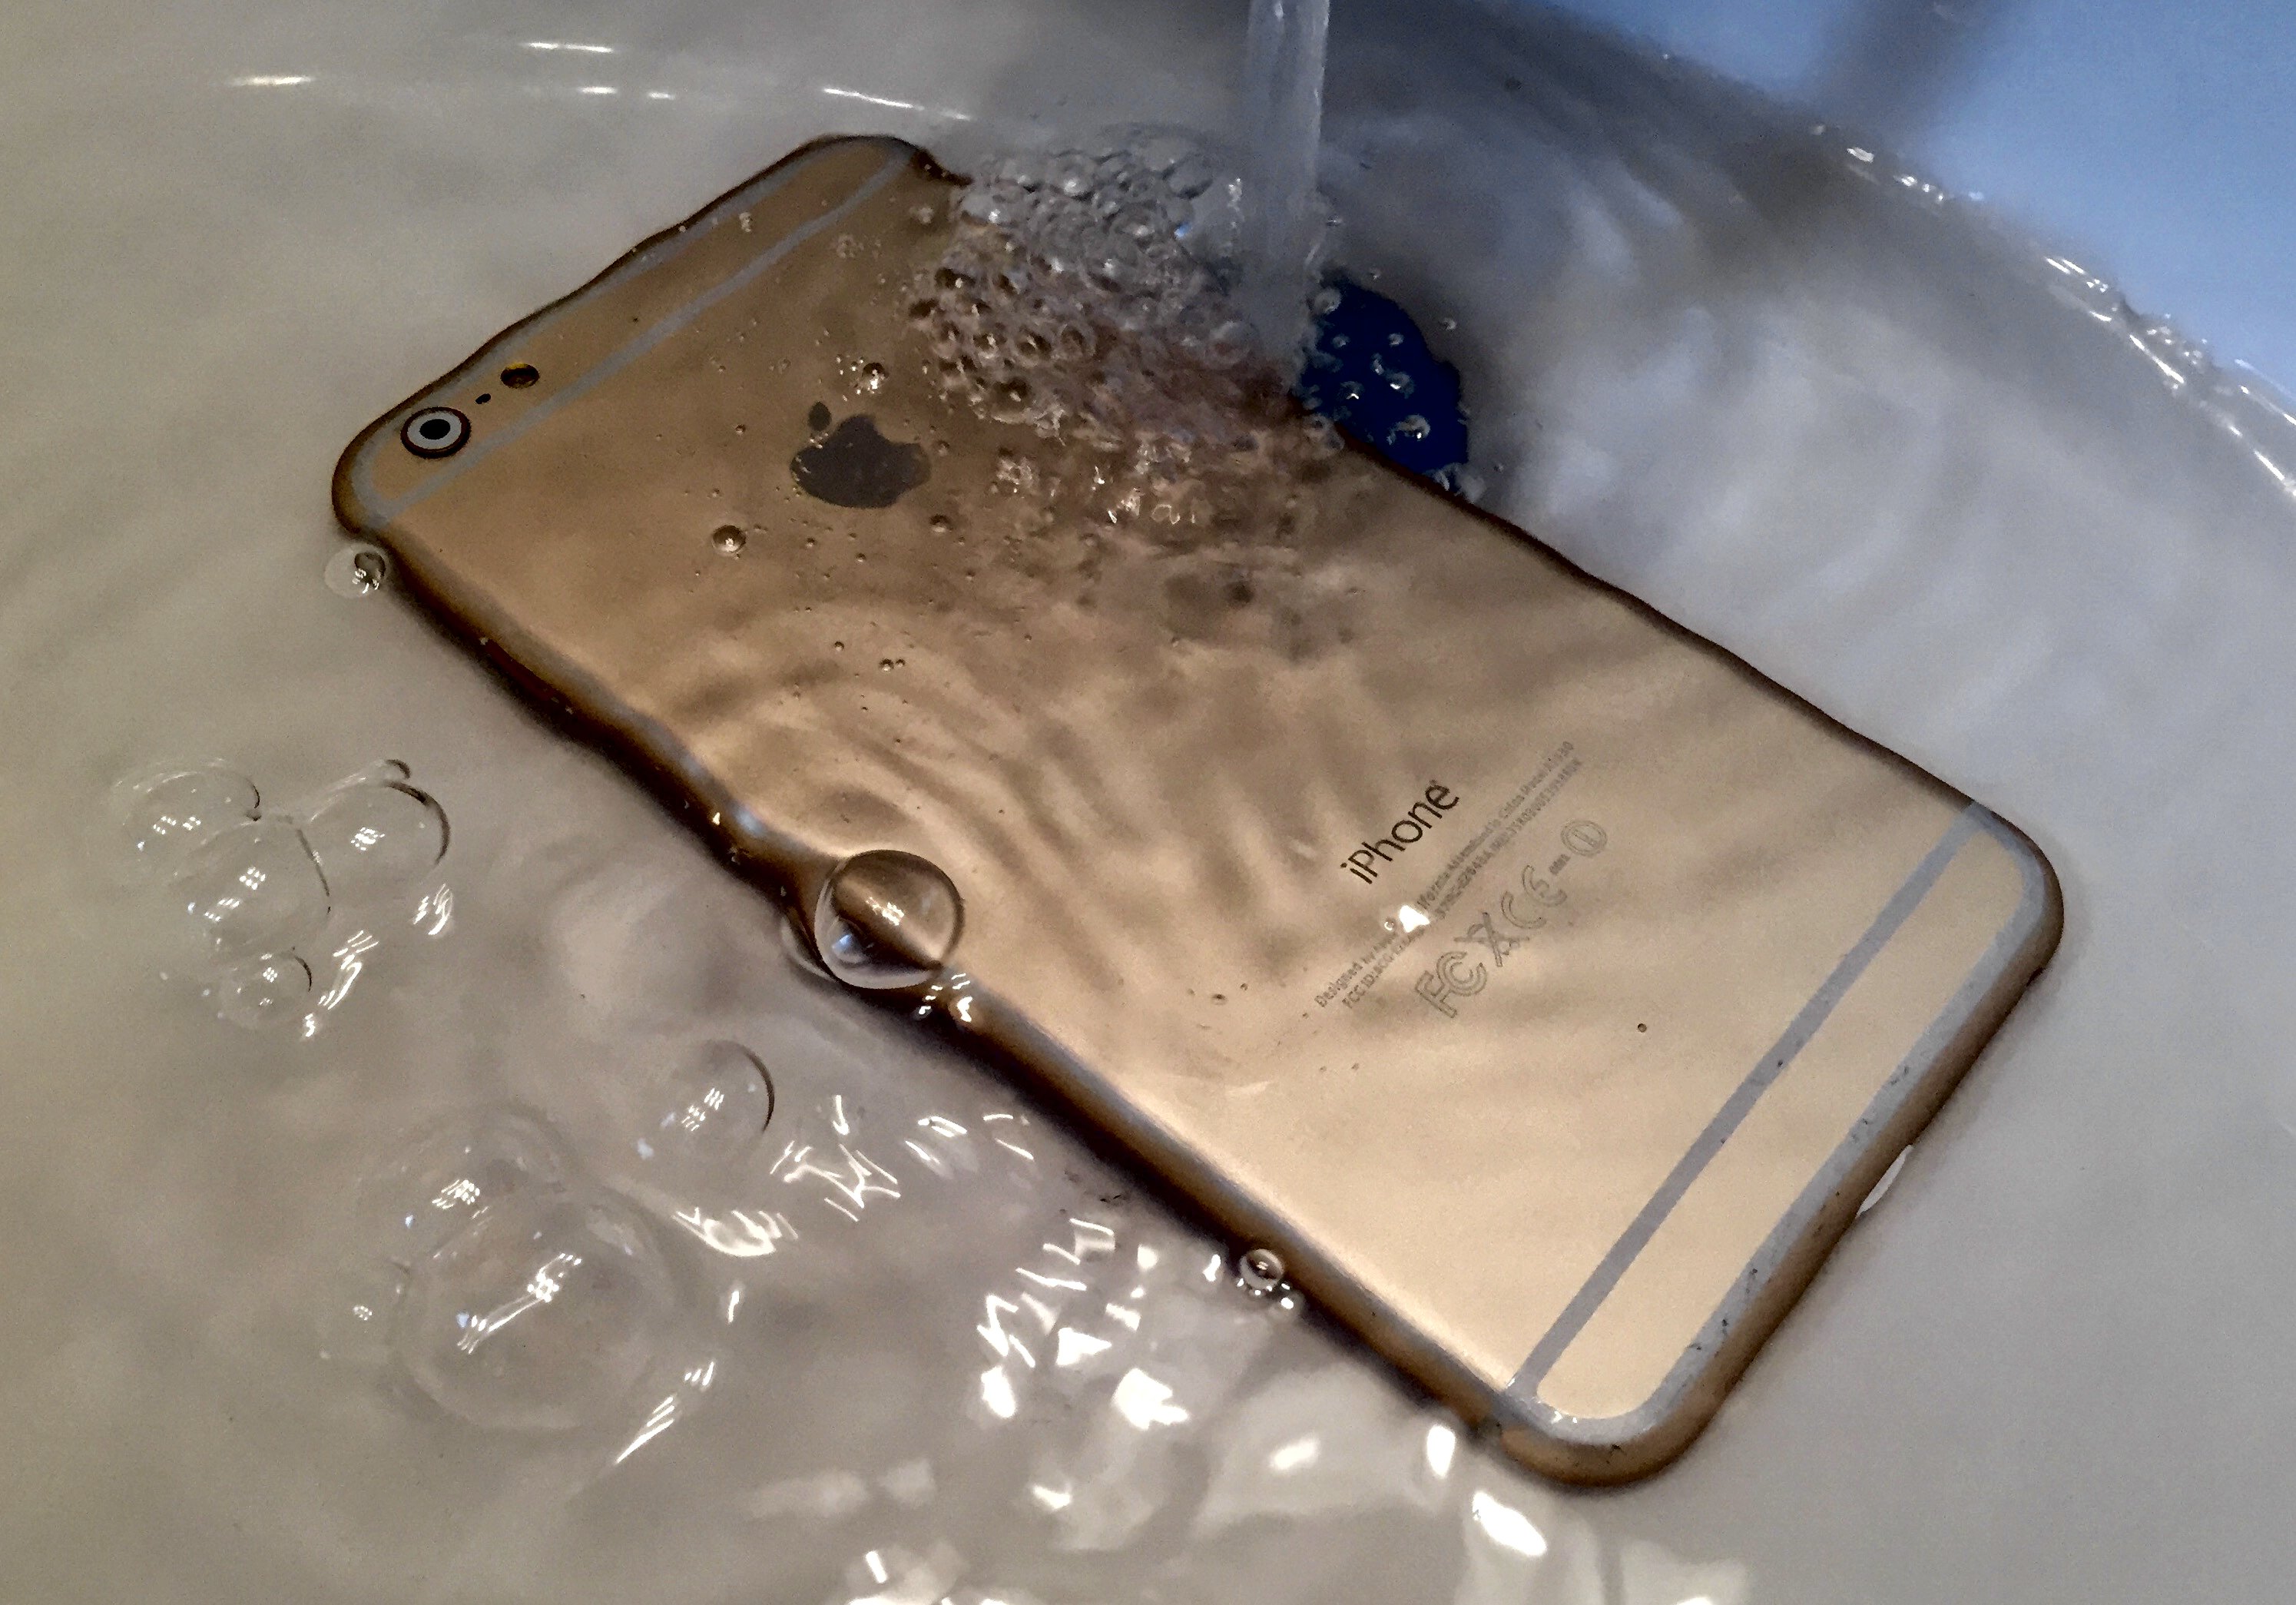 We could see a new waterproof iPhone this year.